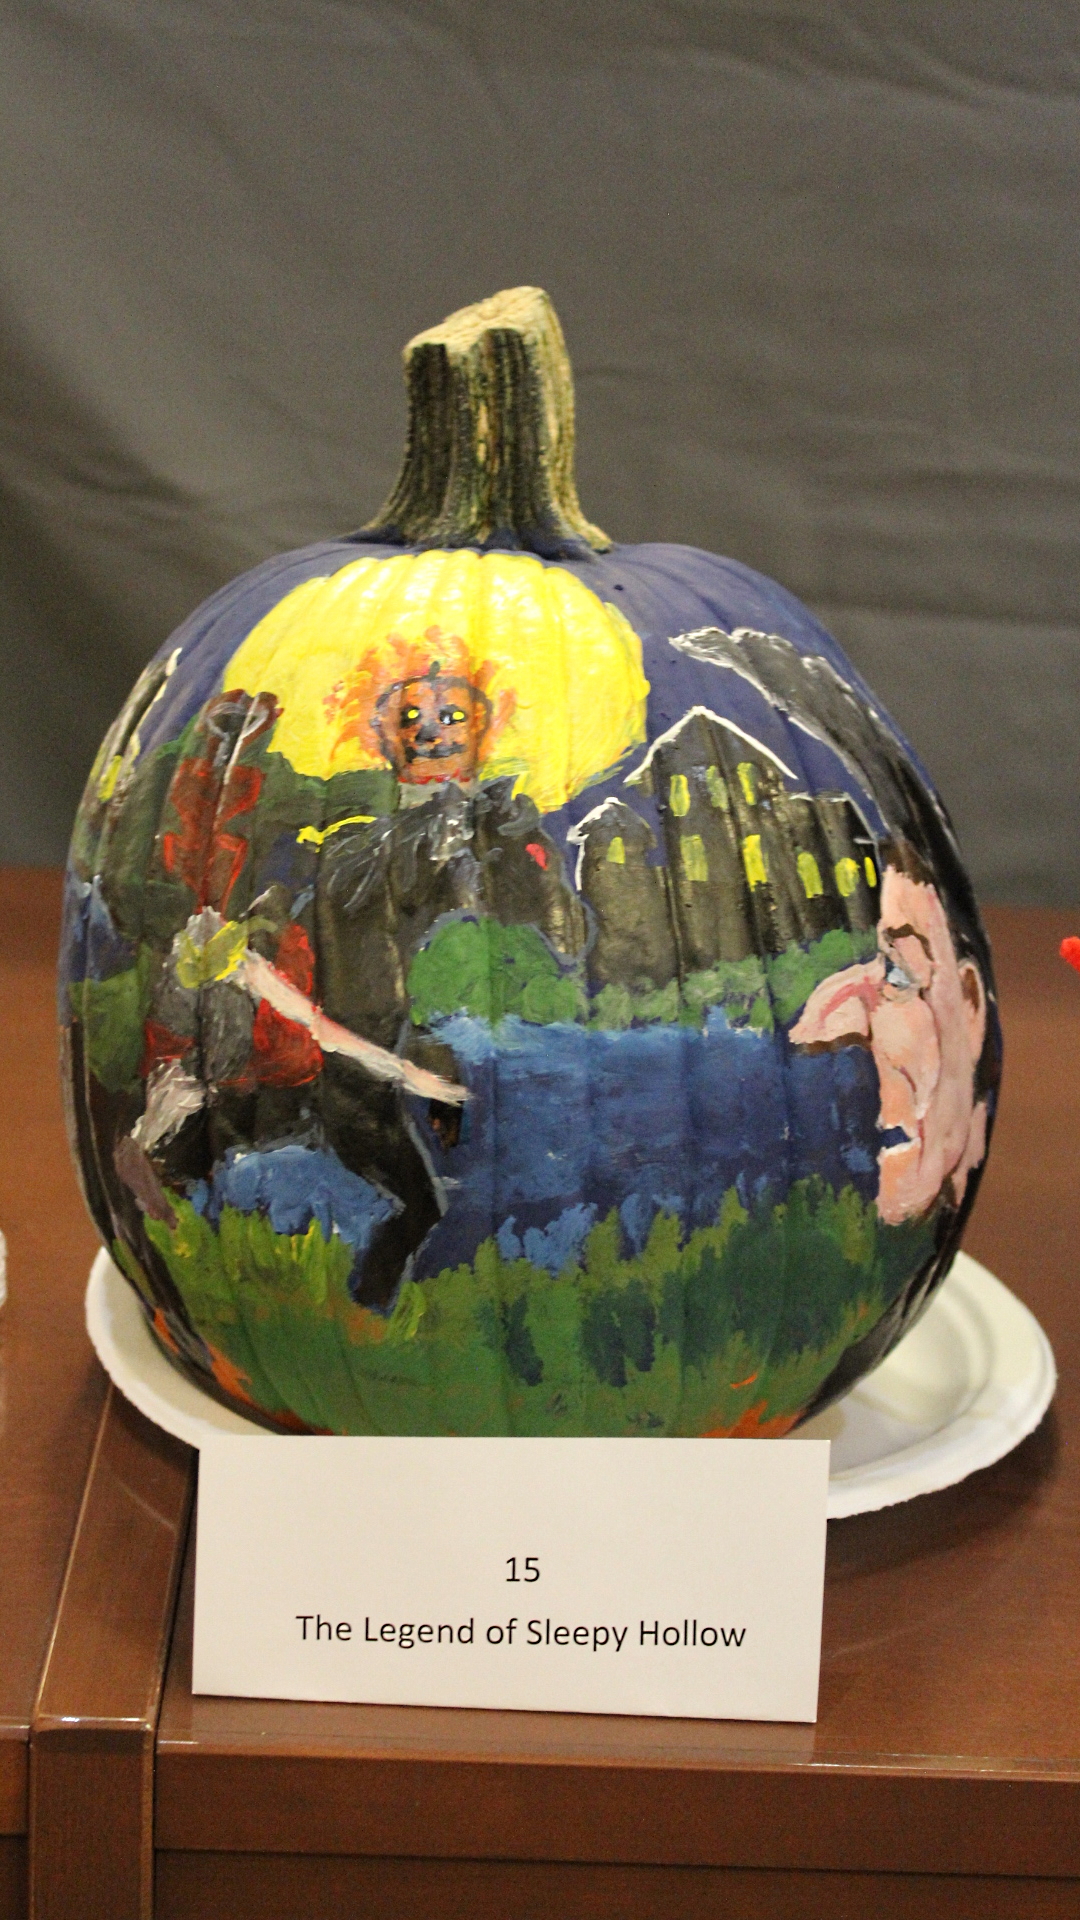 Pumpkin decorated as "The Legend of Sleepy Hollow"